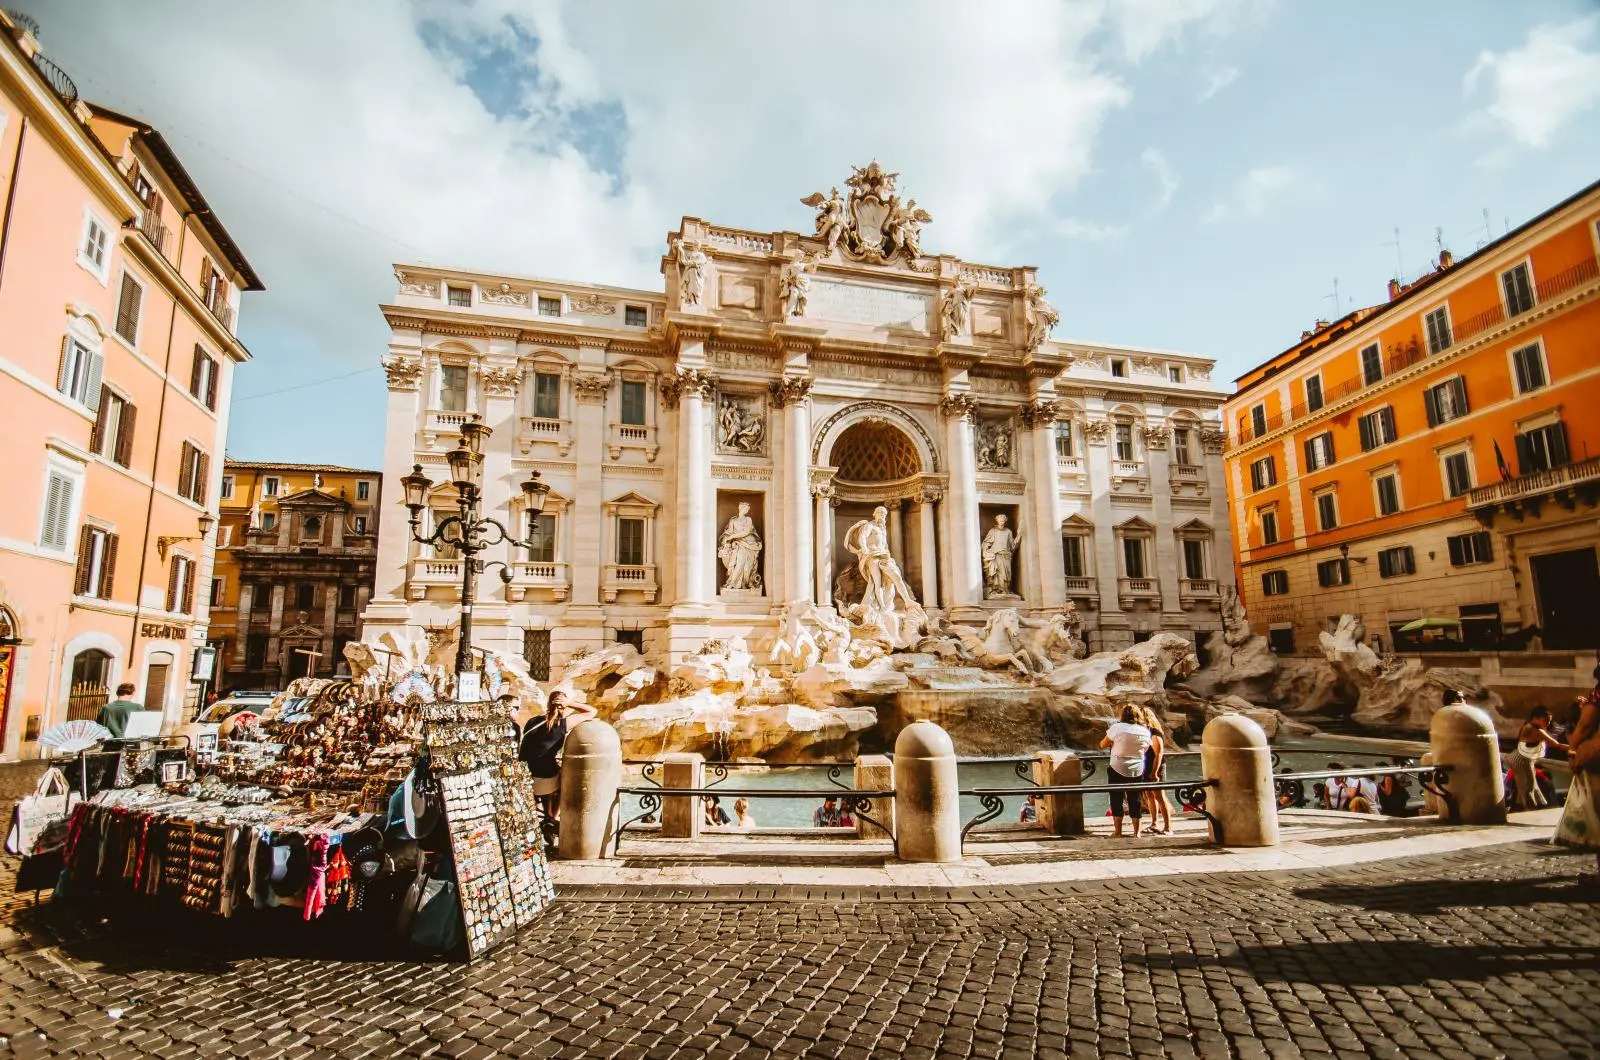 Rome: special things not to miss